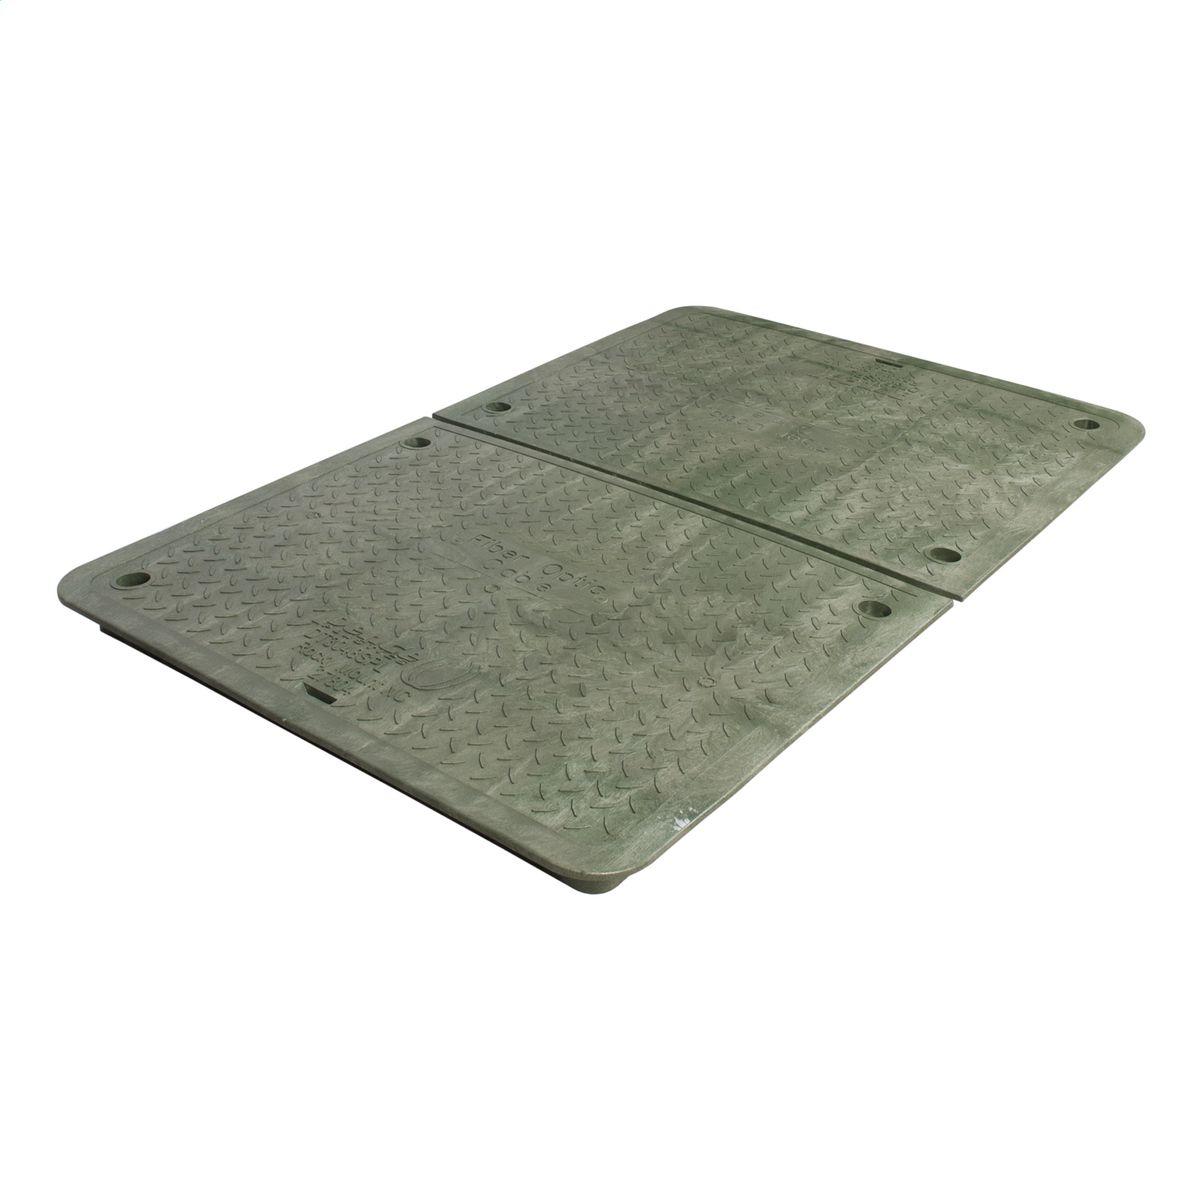 Hubbell PM2448CLH00009 Cover, Polymer Concrete, Heavy Duty 20k, 24"x48"x2", 1-piece, w/2 Bolts, Blank Logo 